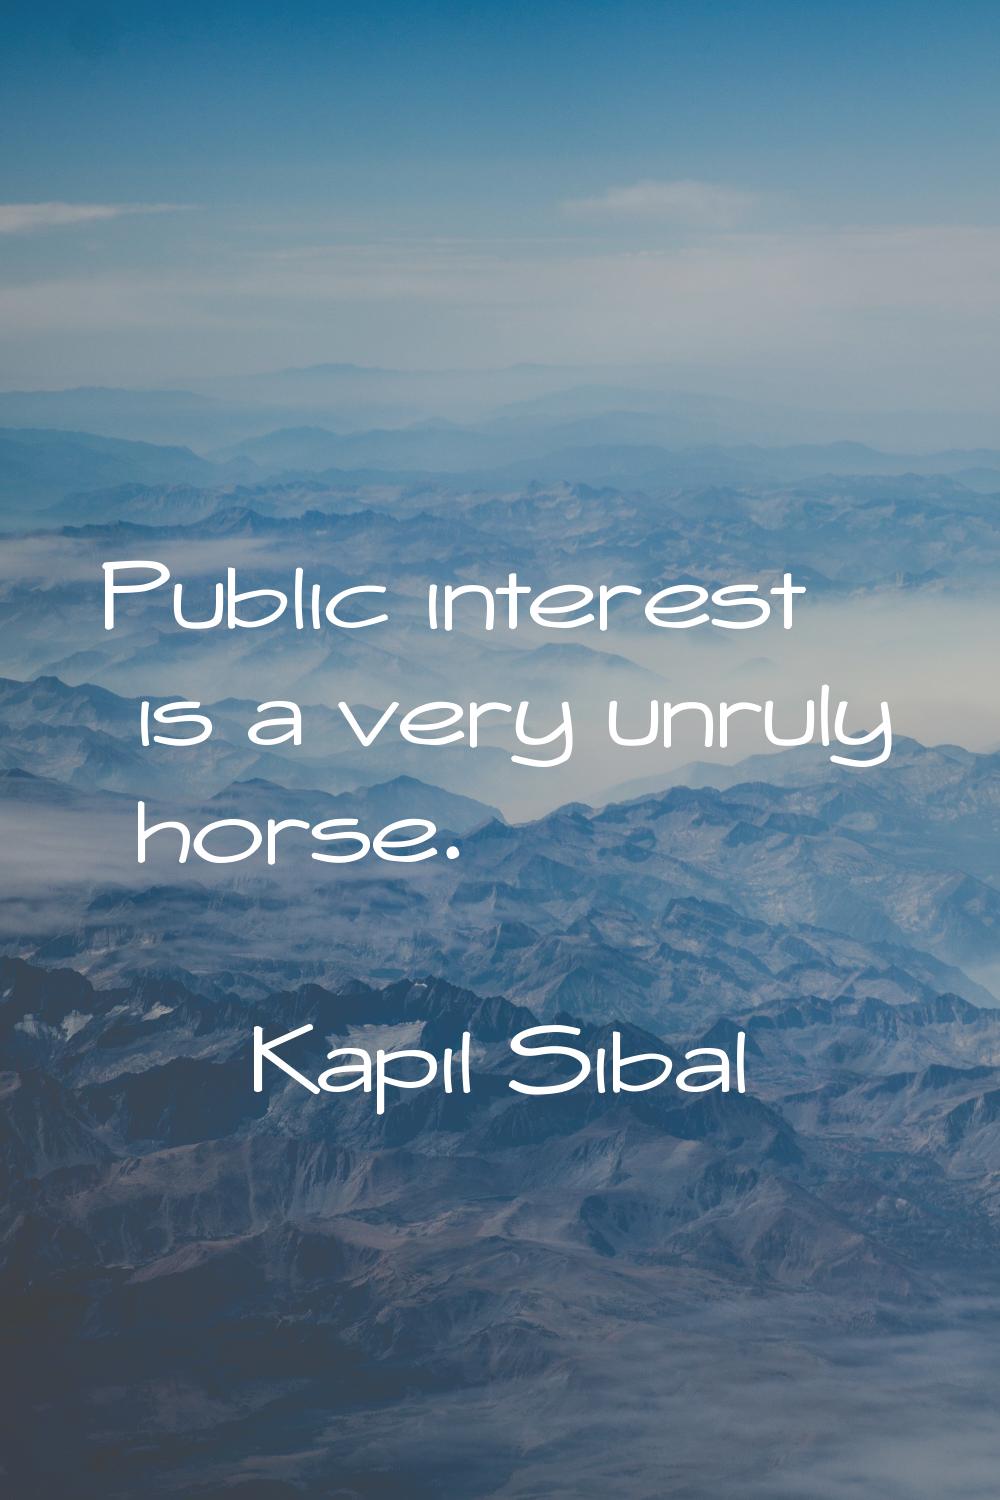 Public interest is a very unruly horse.